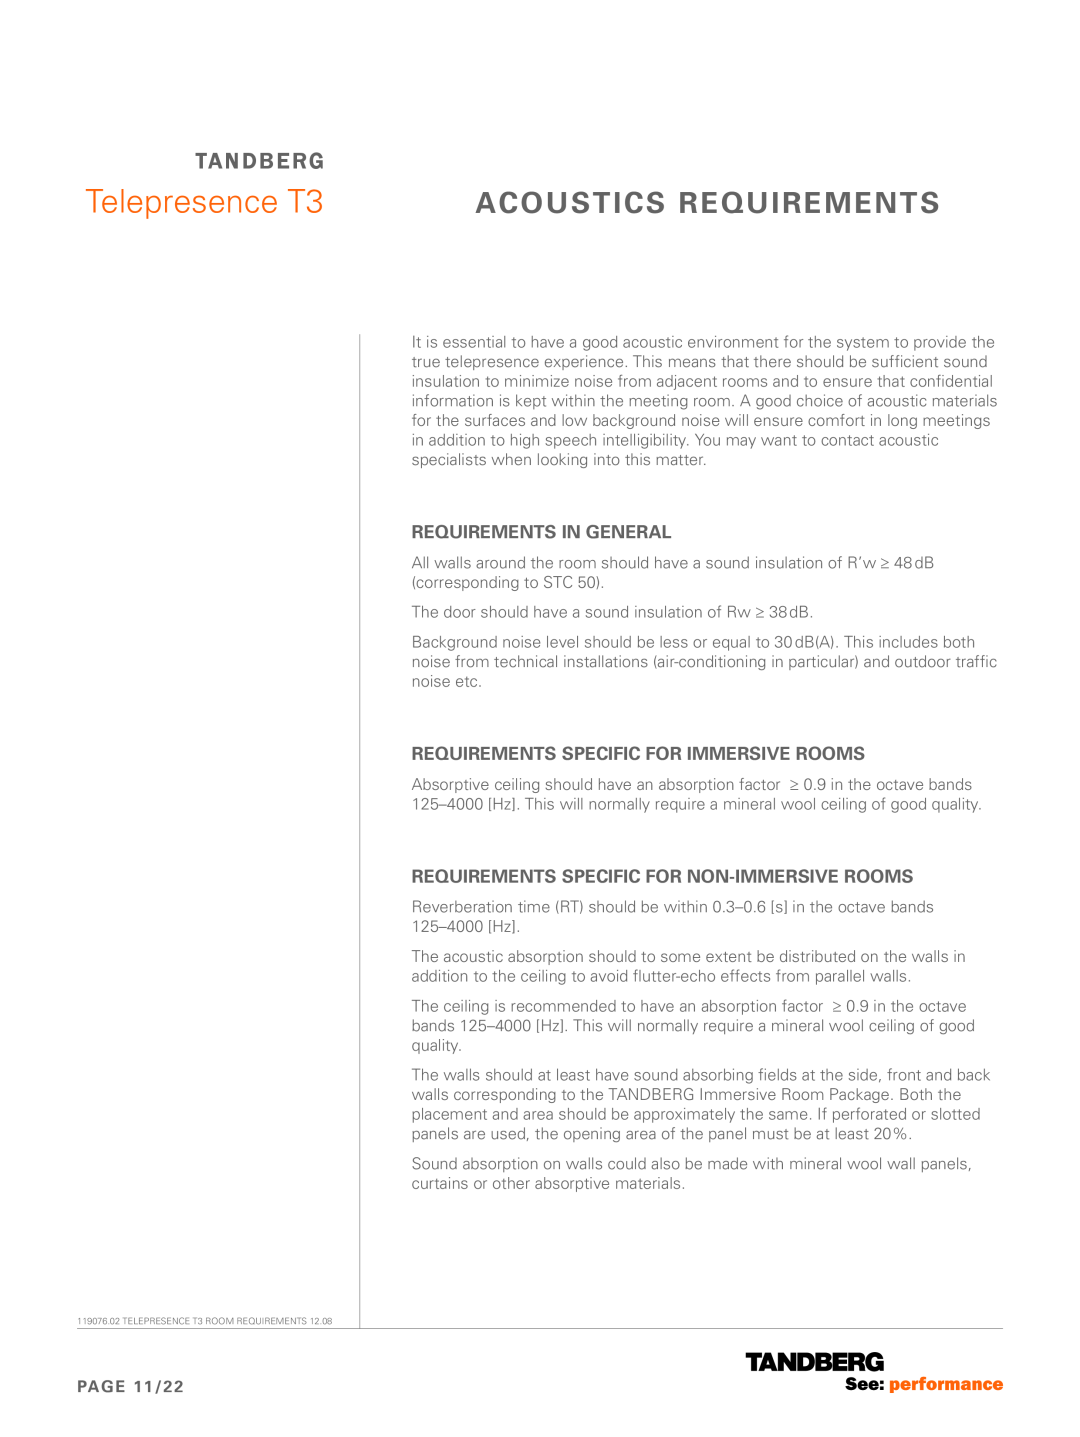 TANDBERG 119076.02 Acoustics REQUIREMENTS, Requirements in general, Requirements specific for immersive rooms, PAGE 11/22 